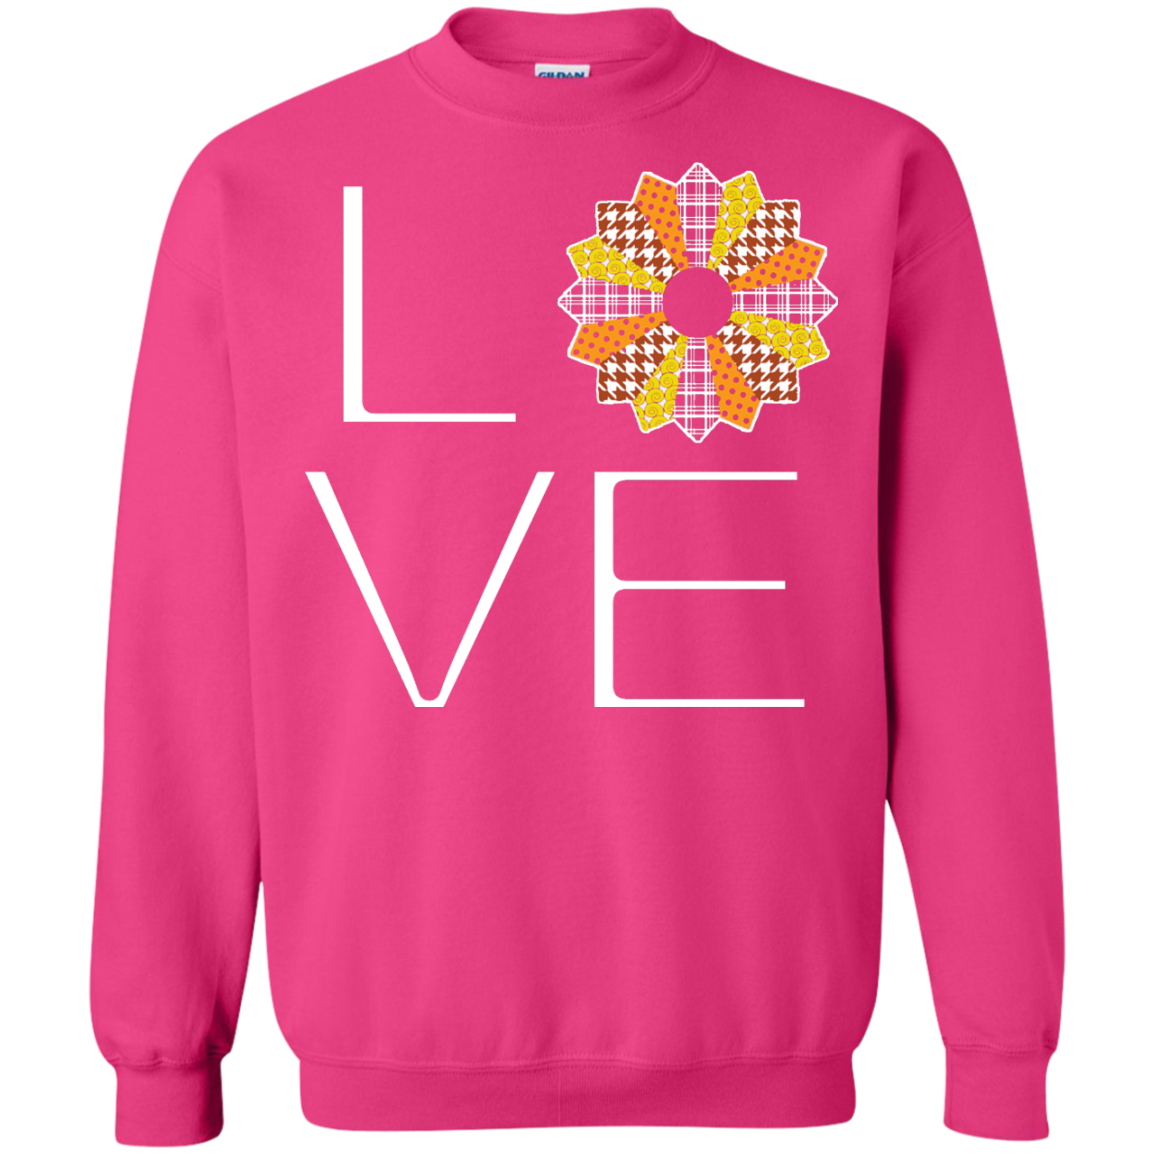 LOVE Quilting (Fall Colors) Crewneck Sweatshirts - Crafter4Life - 11